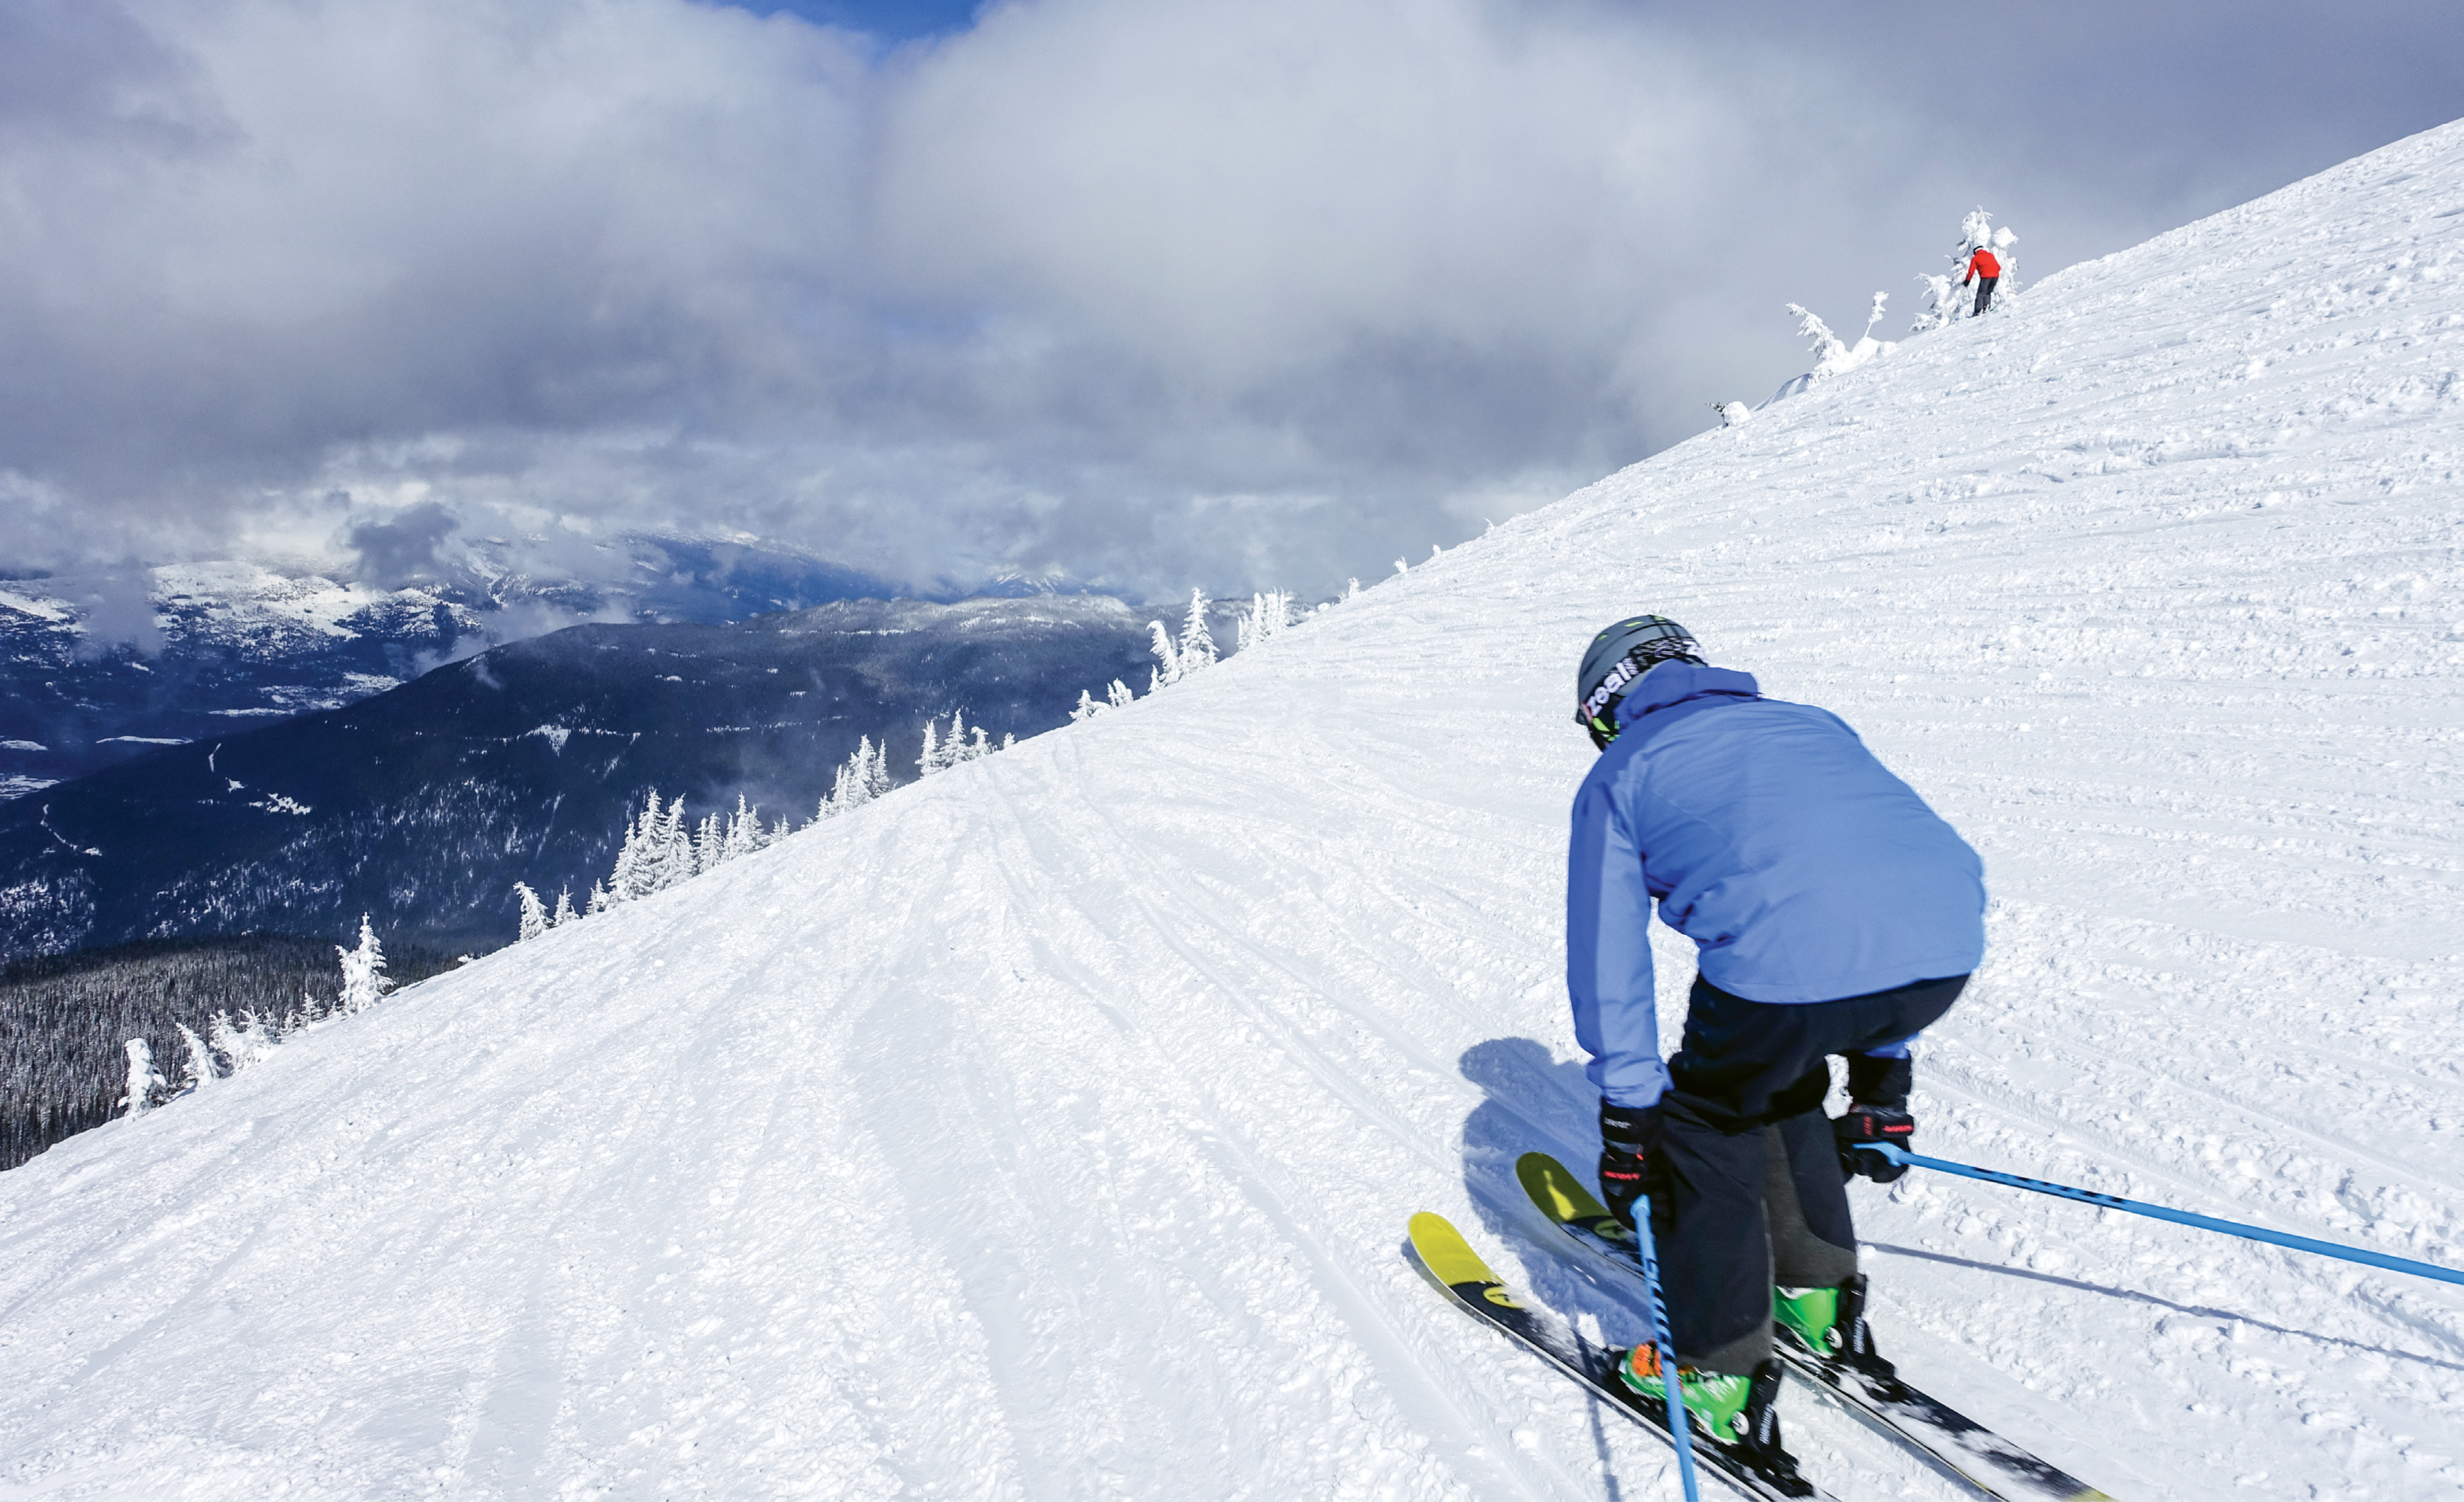 Stoked in Revelstoke: An easy traverse from the top of the British Columbia resort’s highest lift yields a vast mountainside of fluffy snow bowls and inviting forested trails.